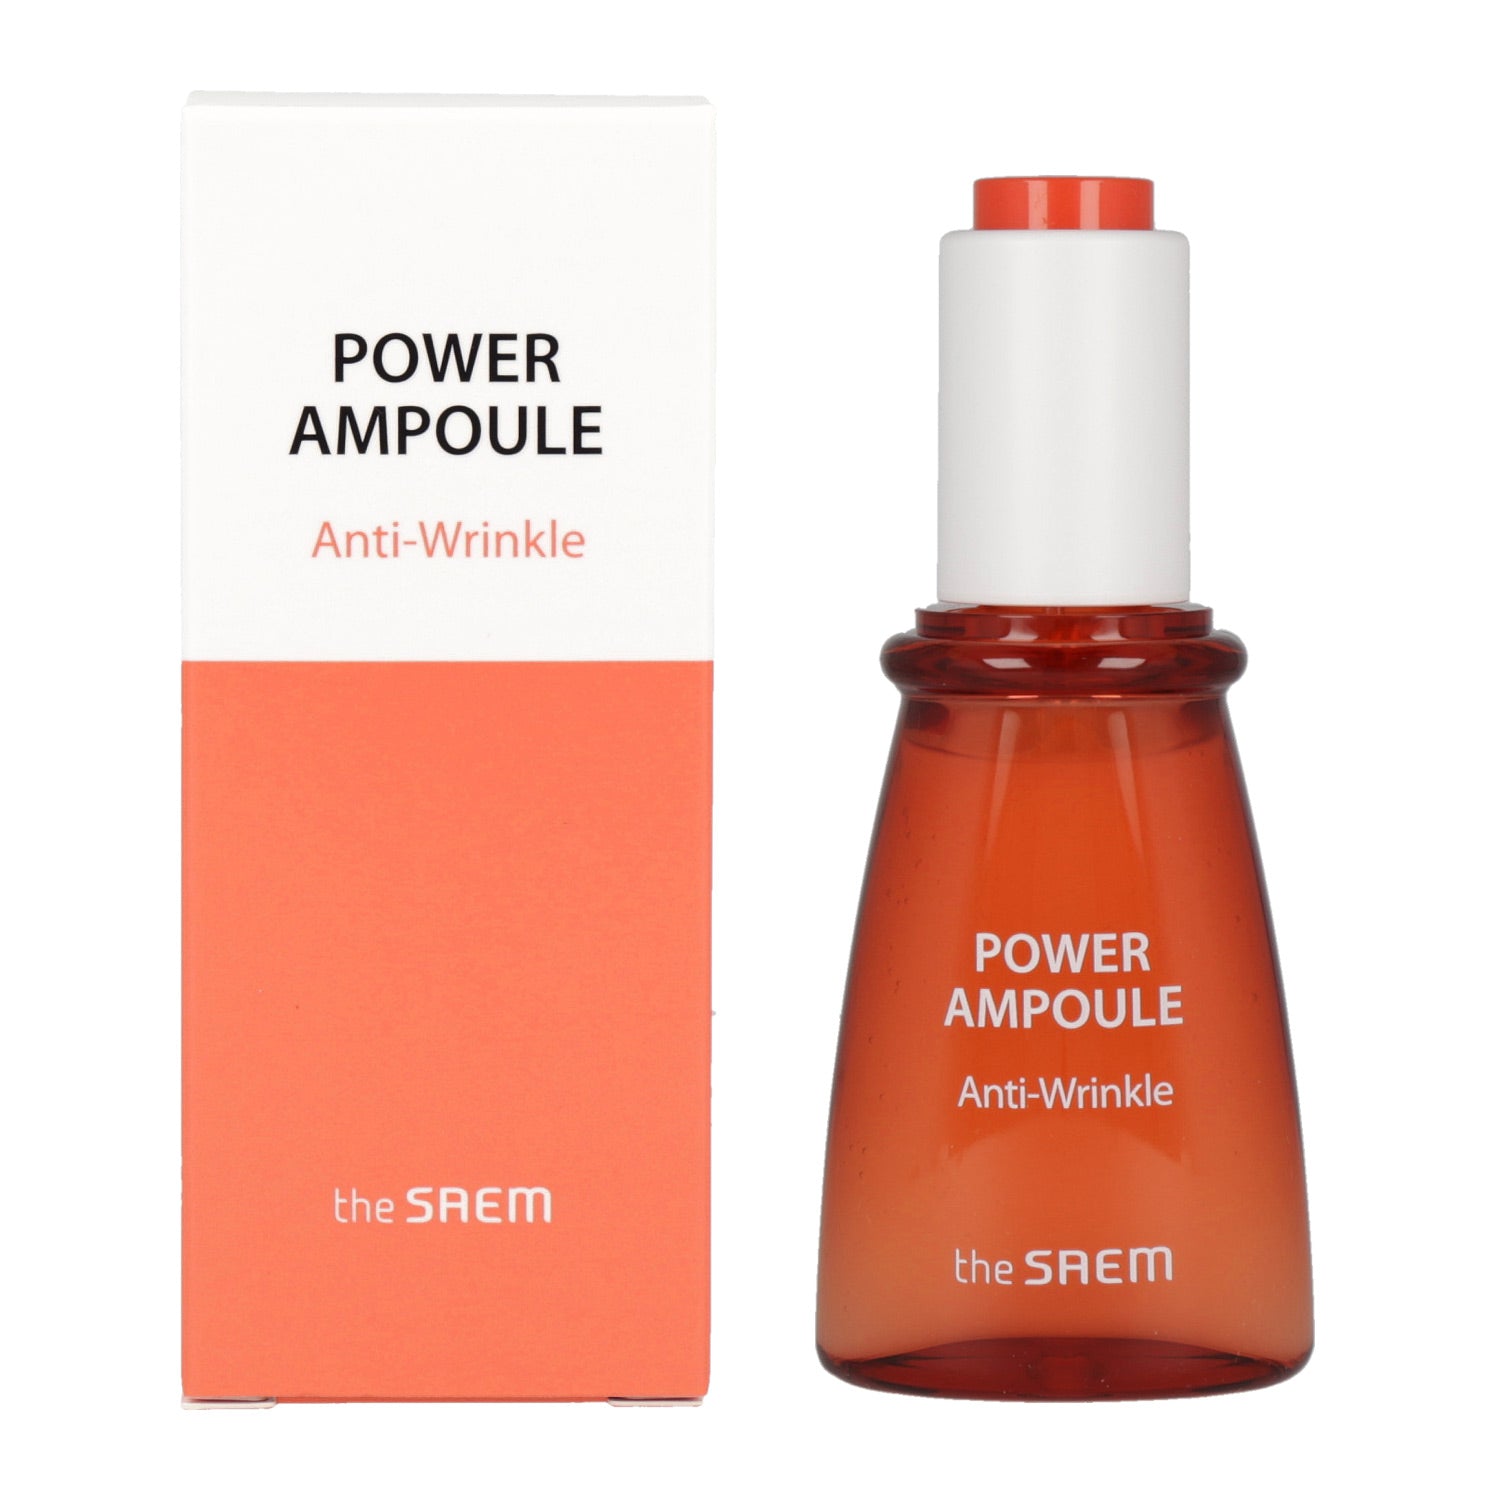 [US STOCK] the SAEM Power Ampoule Anti-wrinkle 35ml